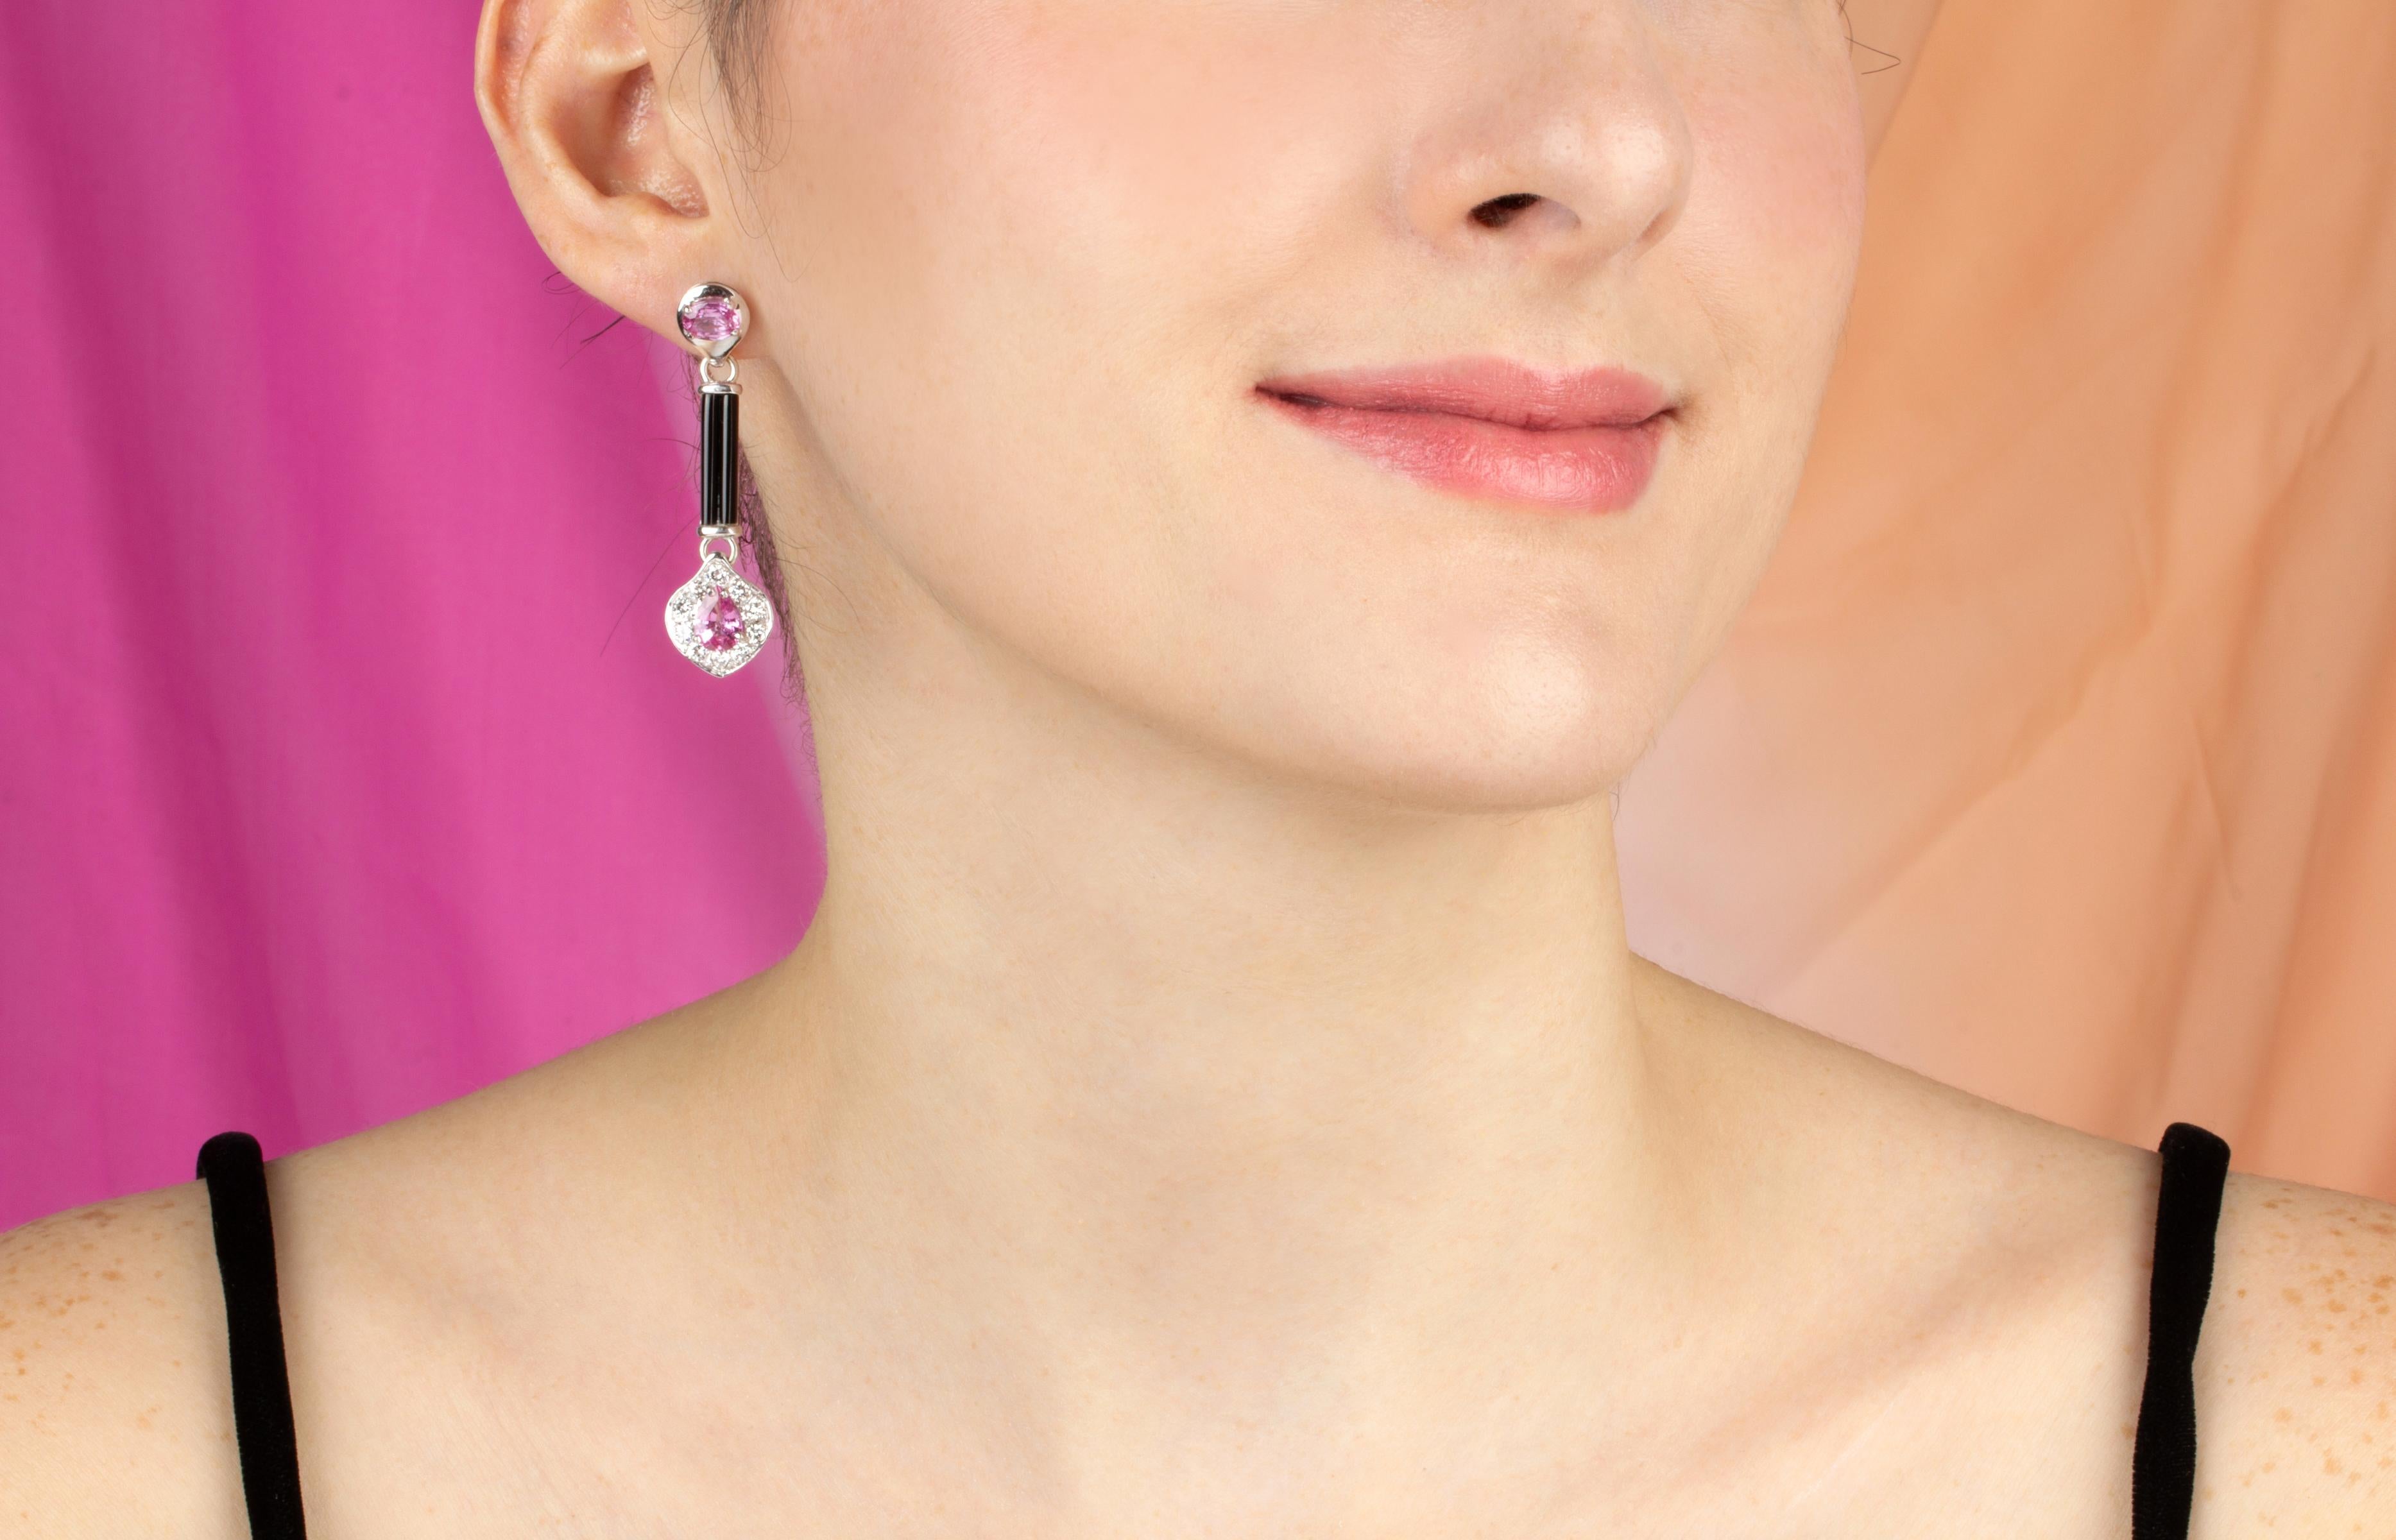 These pink sapphire and diamond drop earrings feature 4 faceted sapphires for a total of 3.40 carats in a playful design with black onyx, lending the jewel a distinctive art déco look, and 1.58 carats of round diamonds of top quality (color, clarity